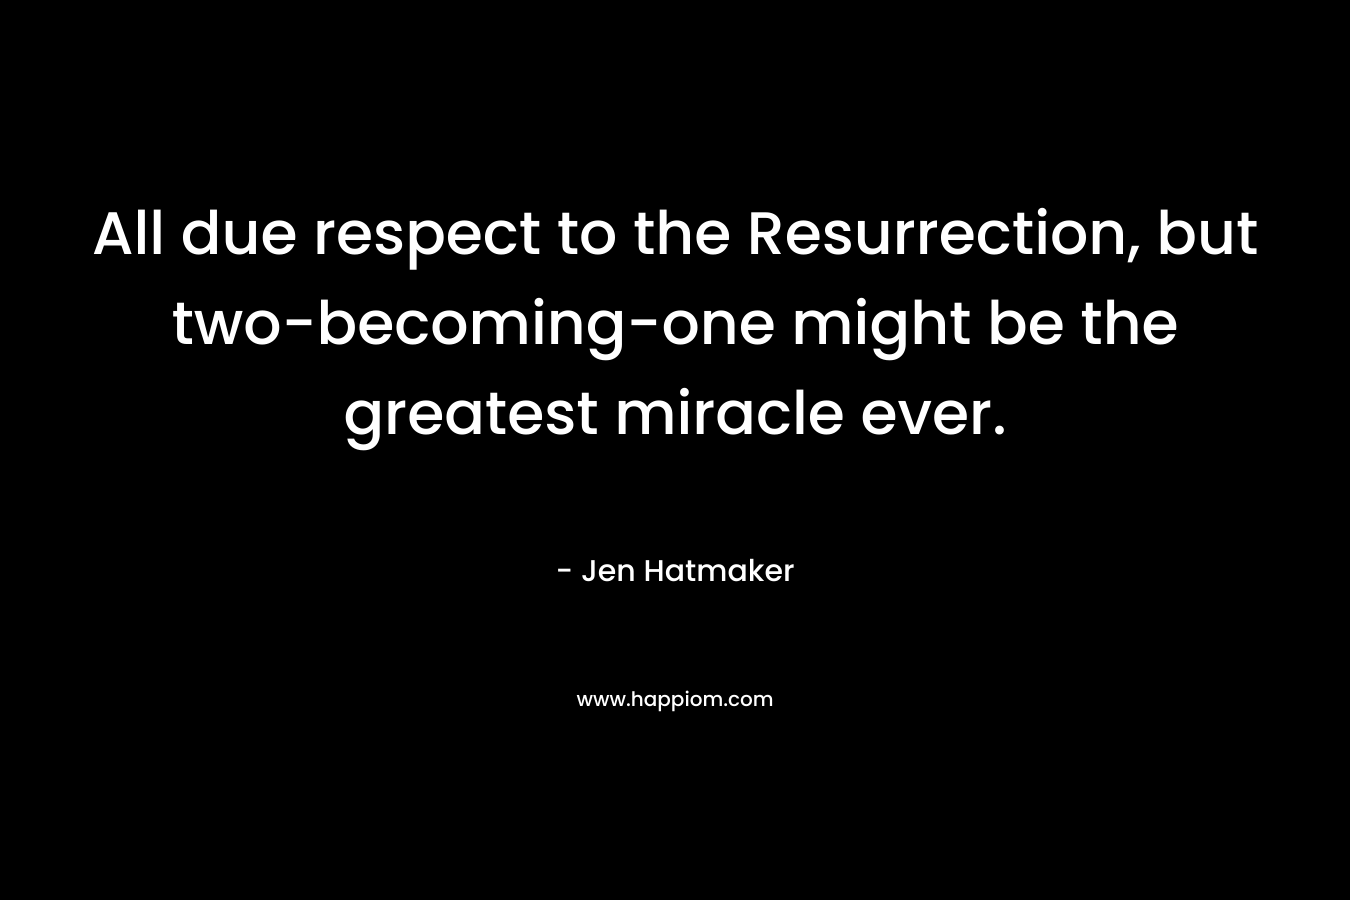 All due respect to the Resurrection, but two-becoming-one might be the greatest miracle ever.